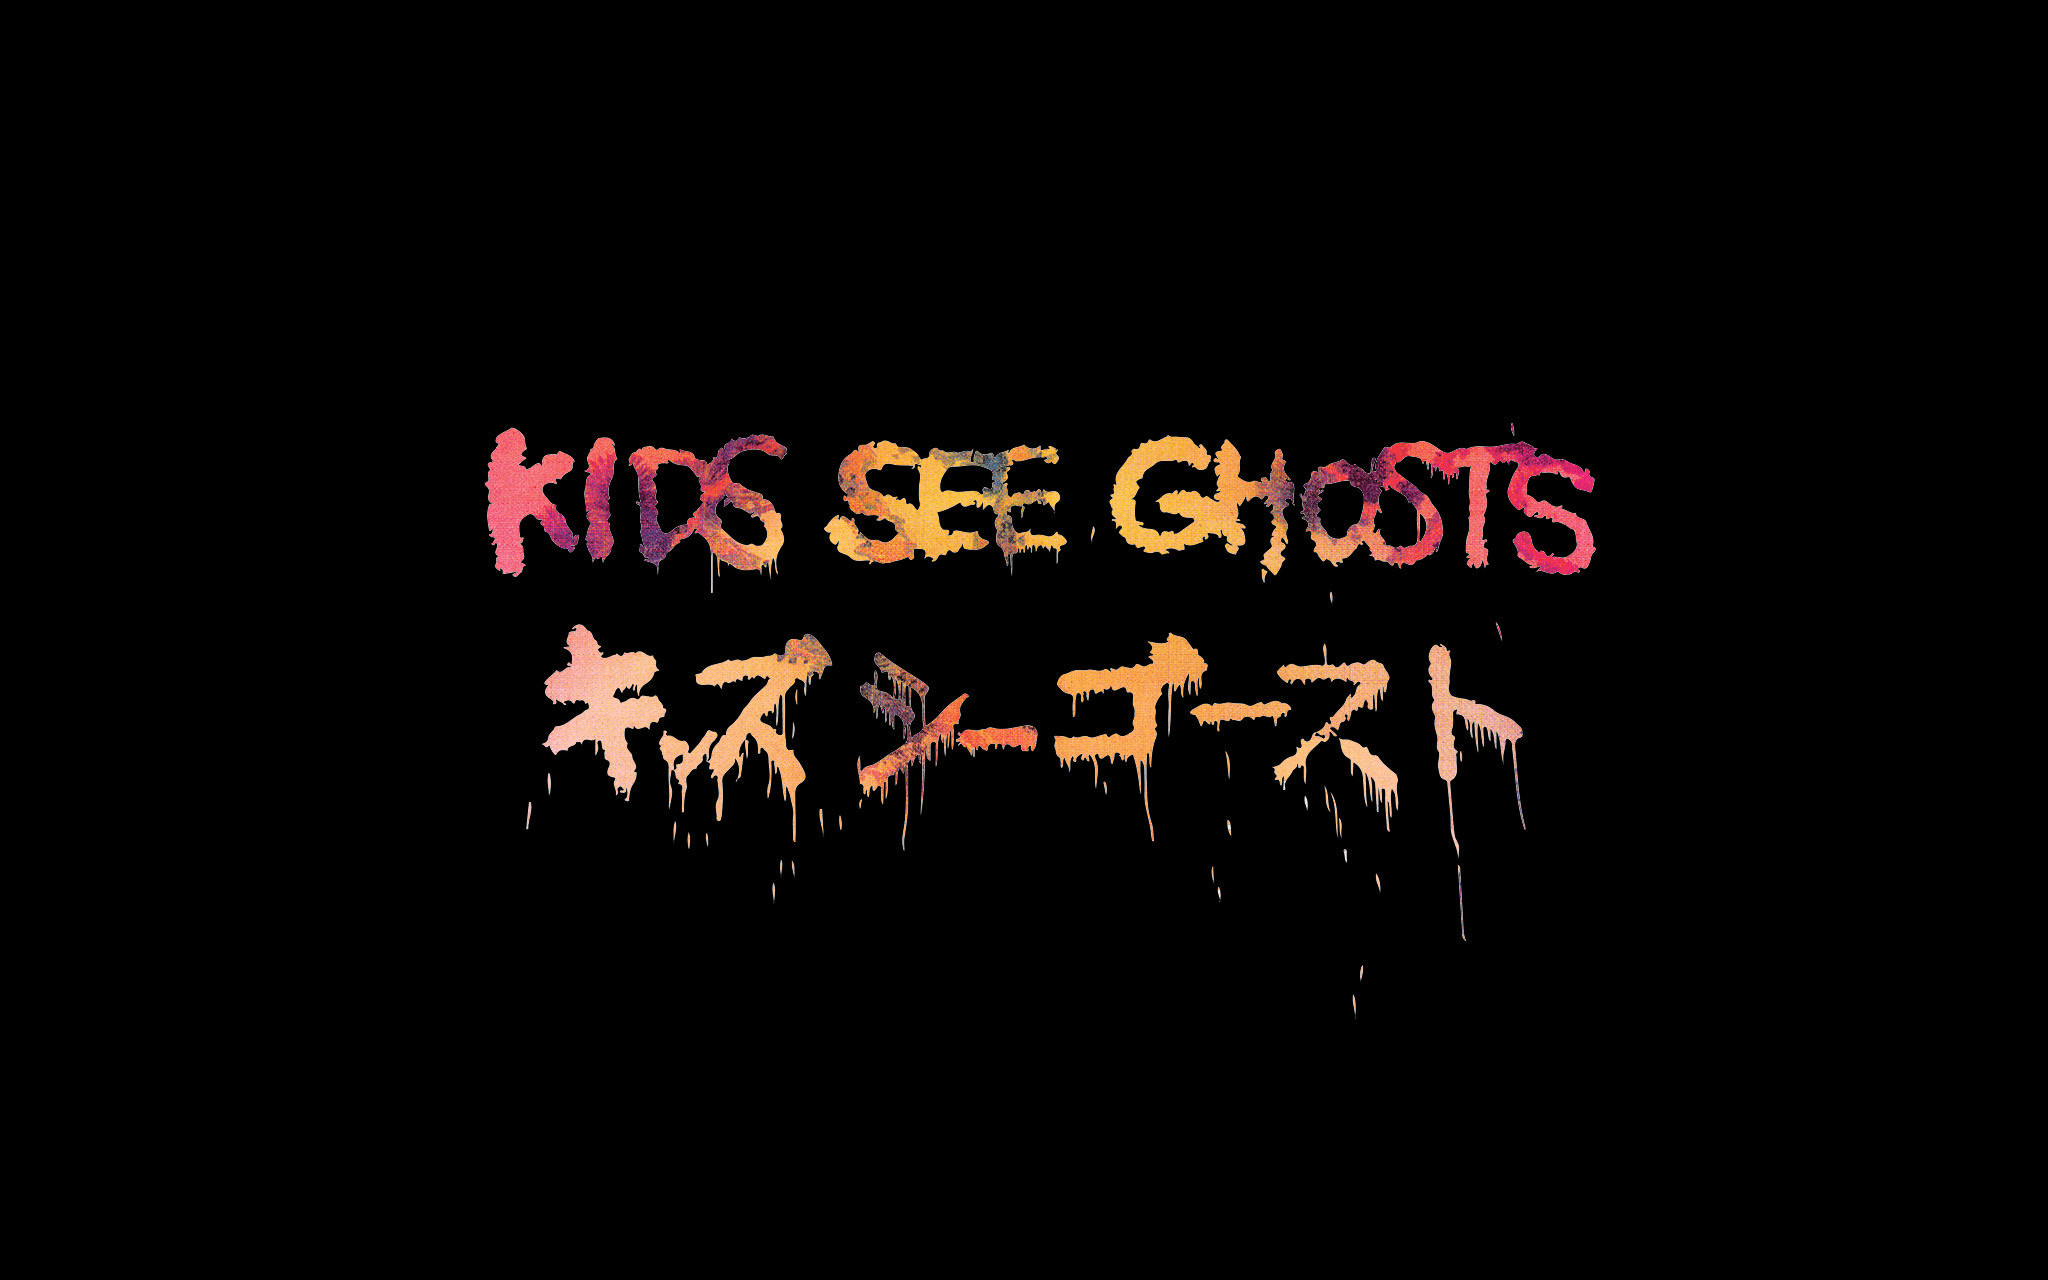 2048x1280 Kids See Ghosts Desktop Wallpaper Need trendy iPhone7 iphone7Plus case  Check out